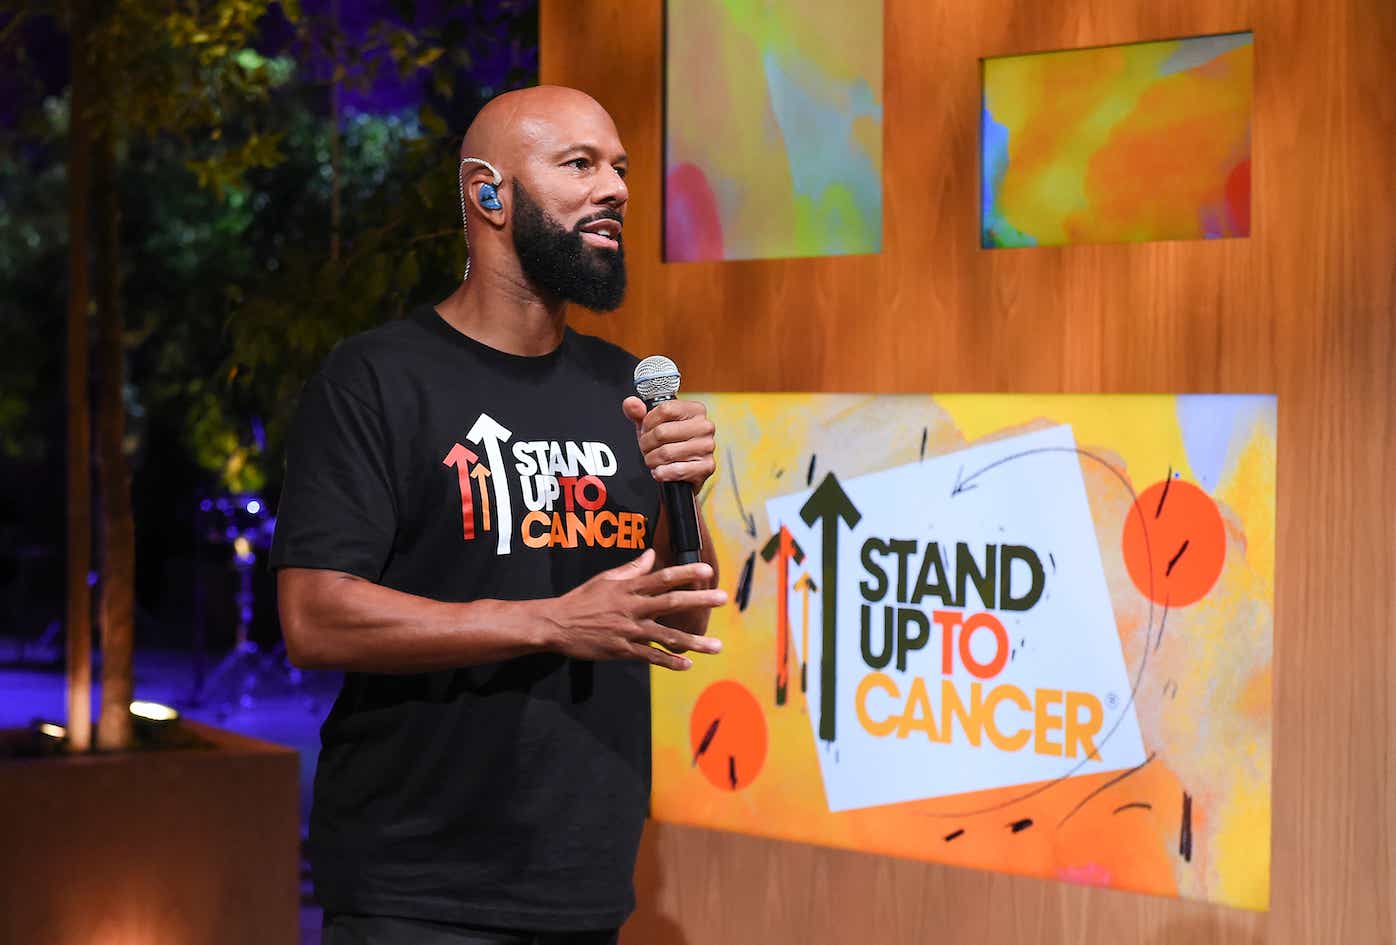 Common stand up to cancer